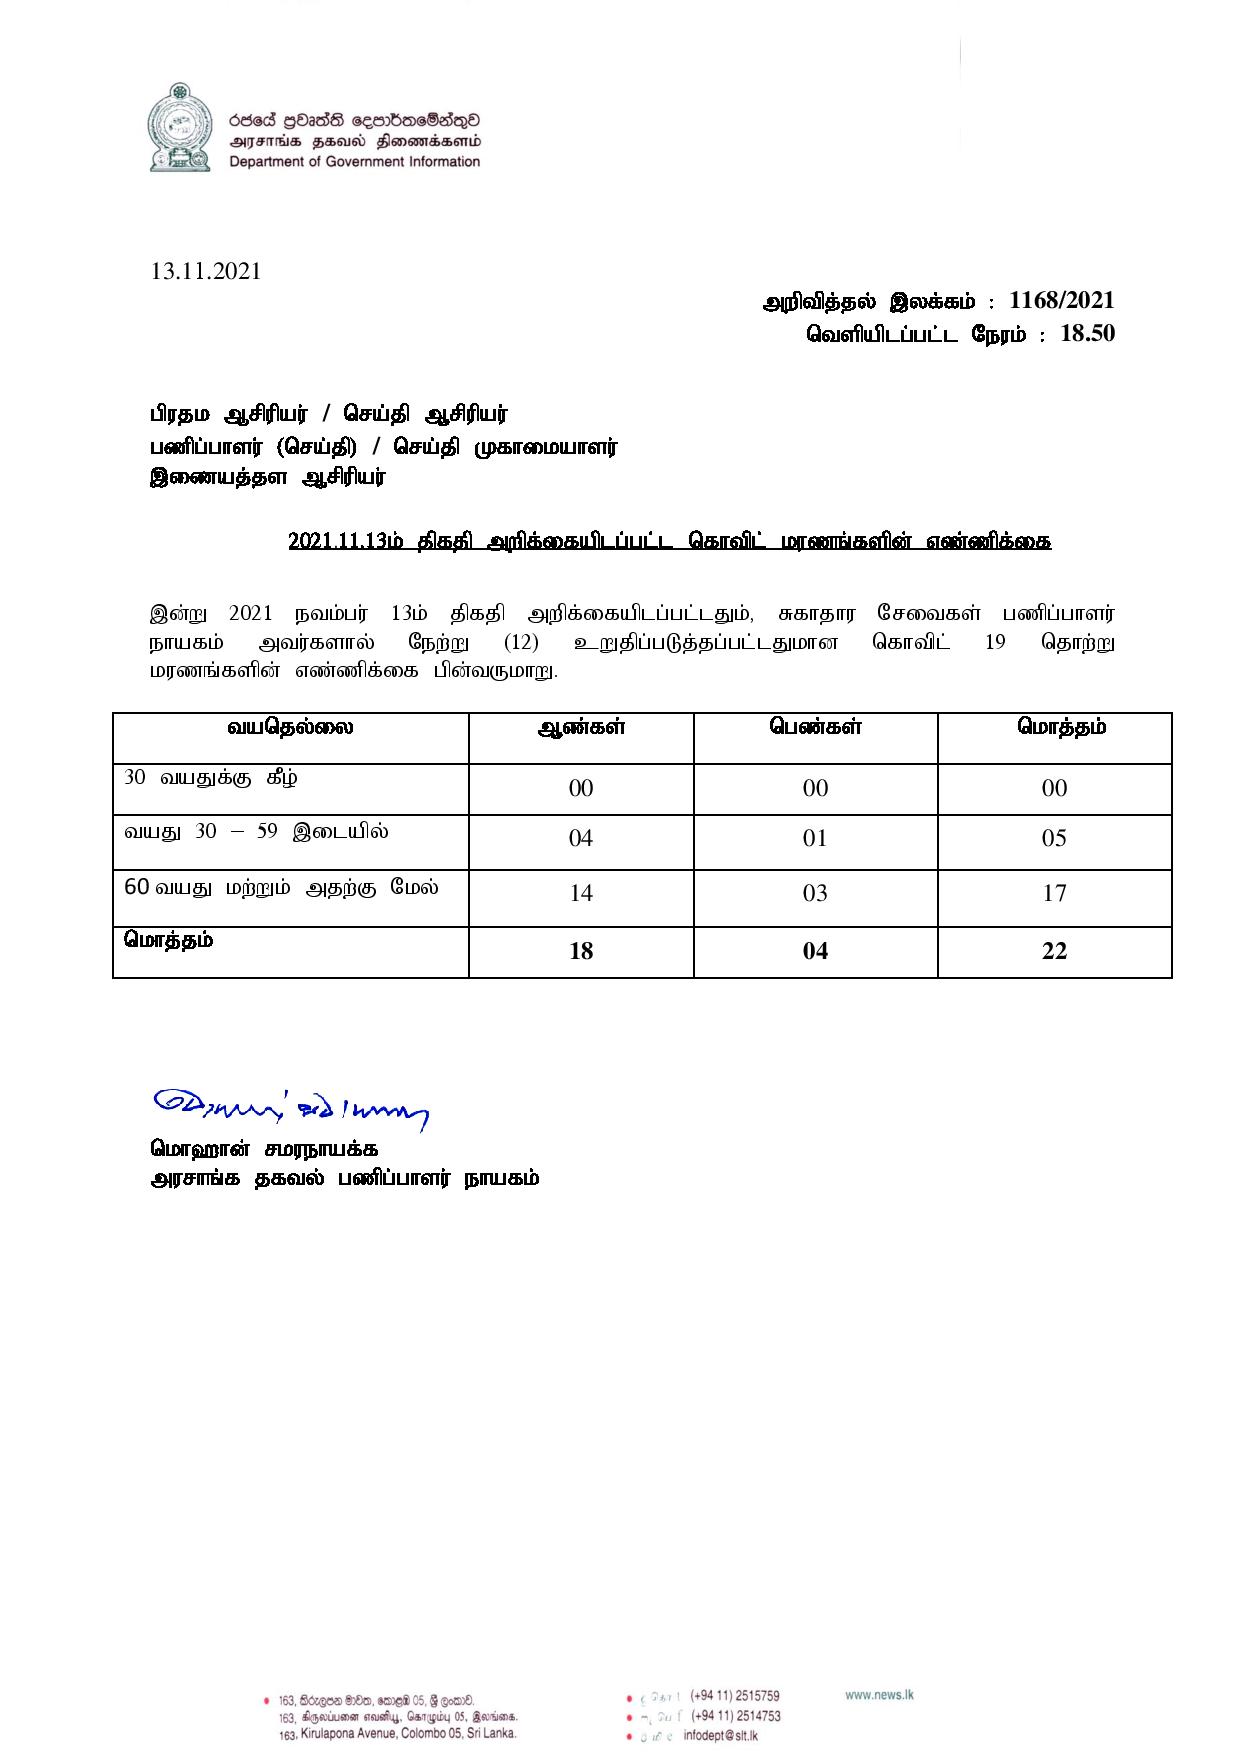 Press Release 1168 Tamil page 001